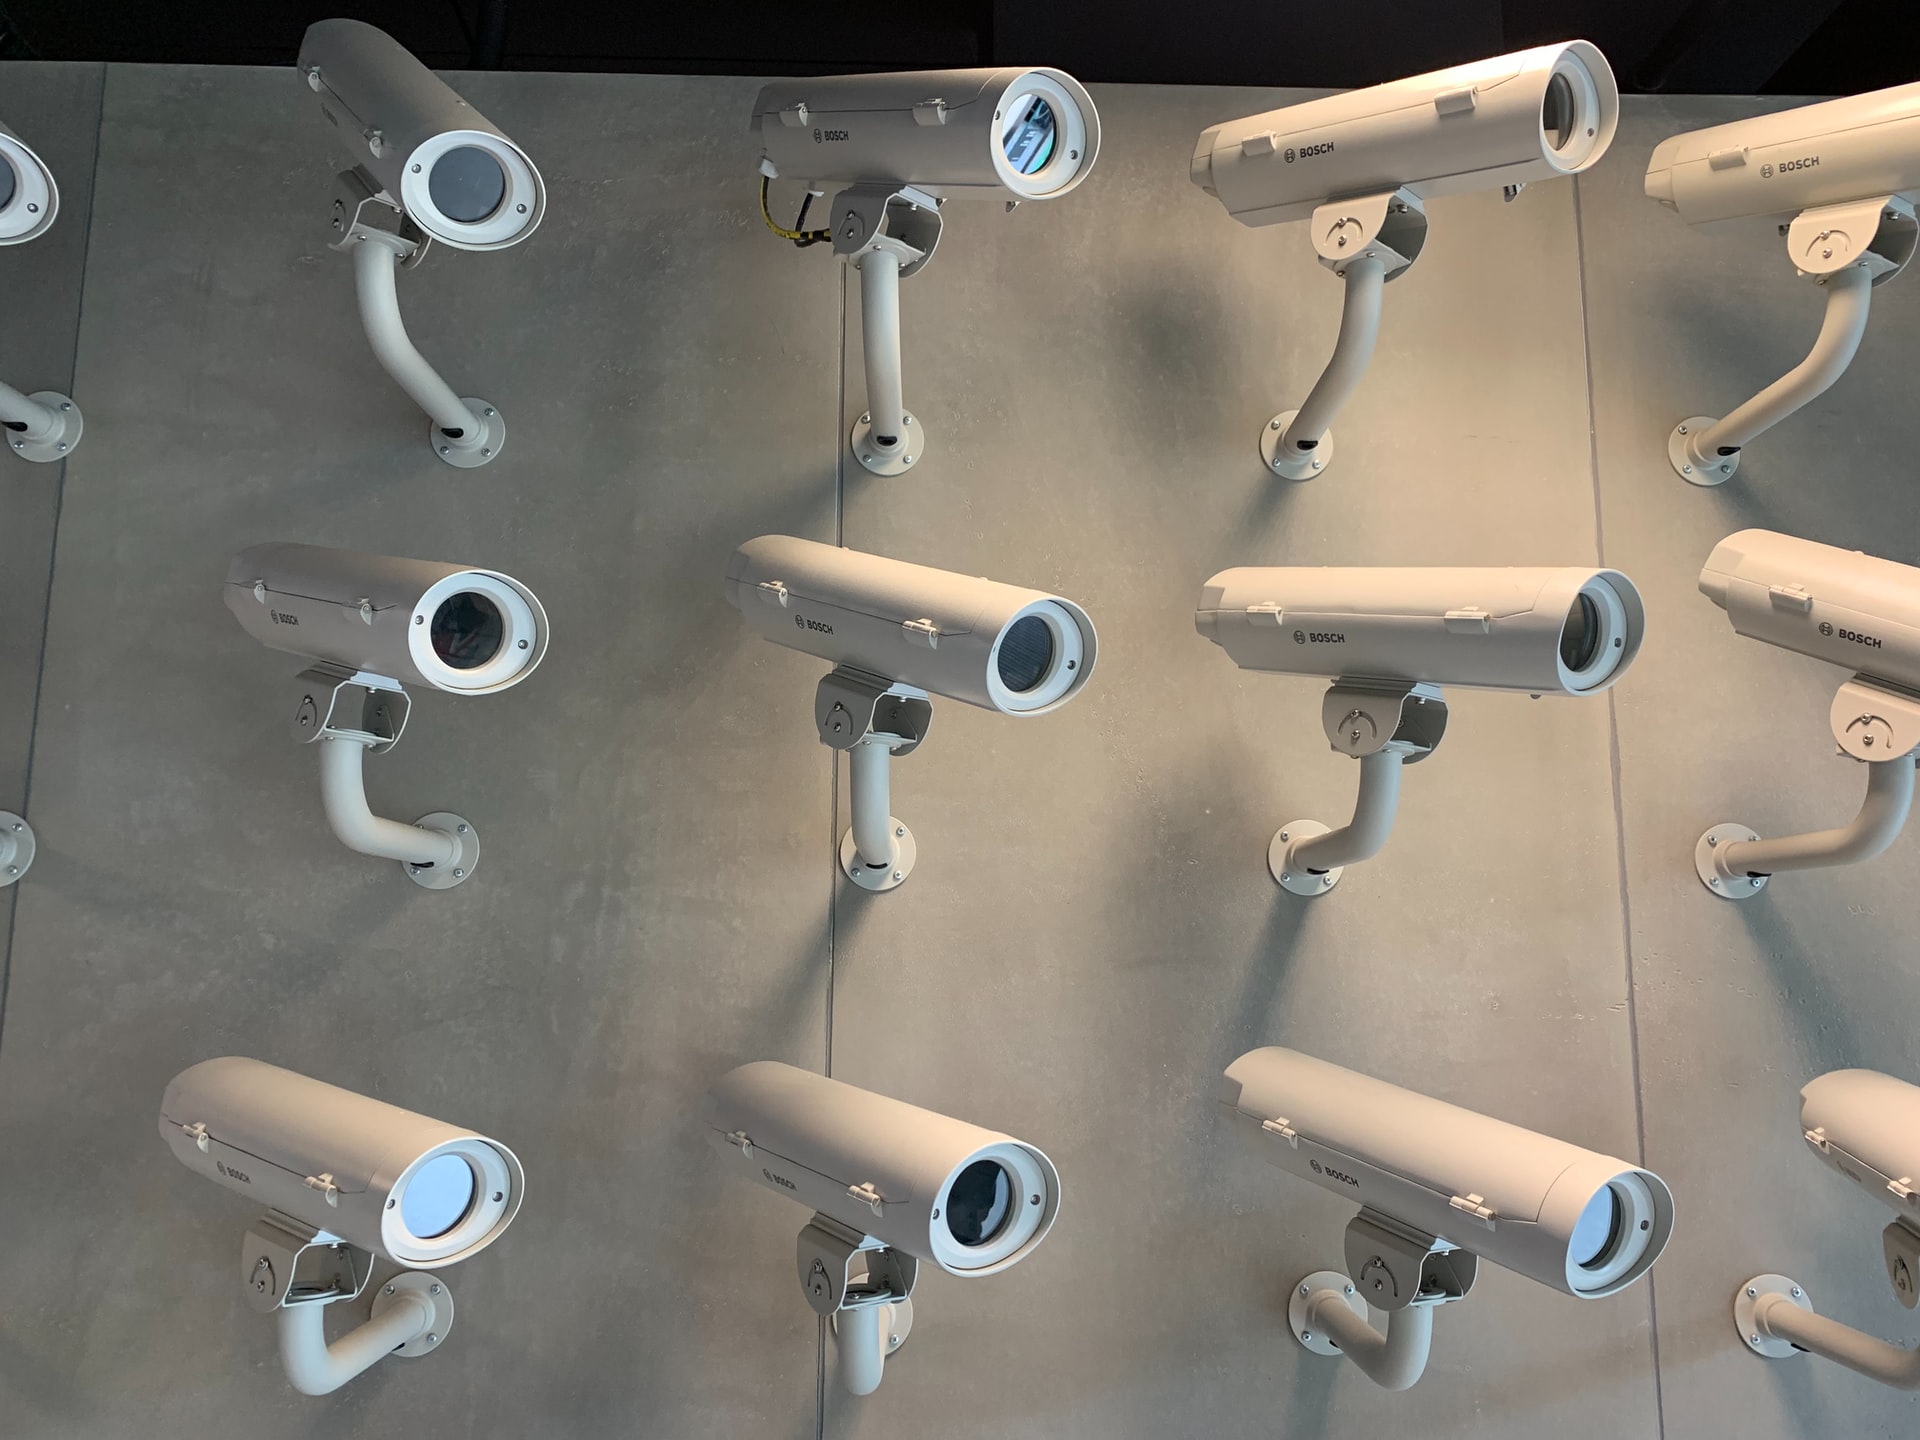 What You Should Know About Alabama’s Security Camera Laws